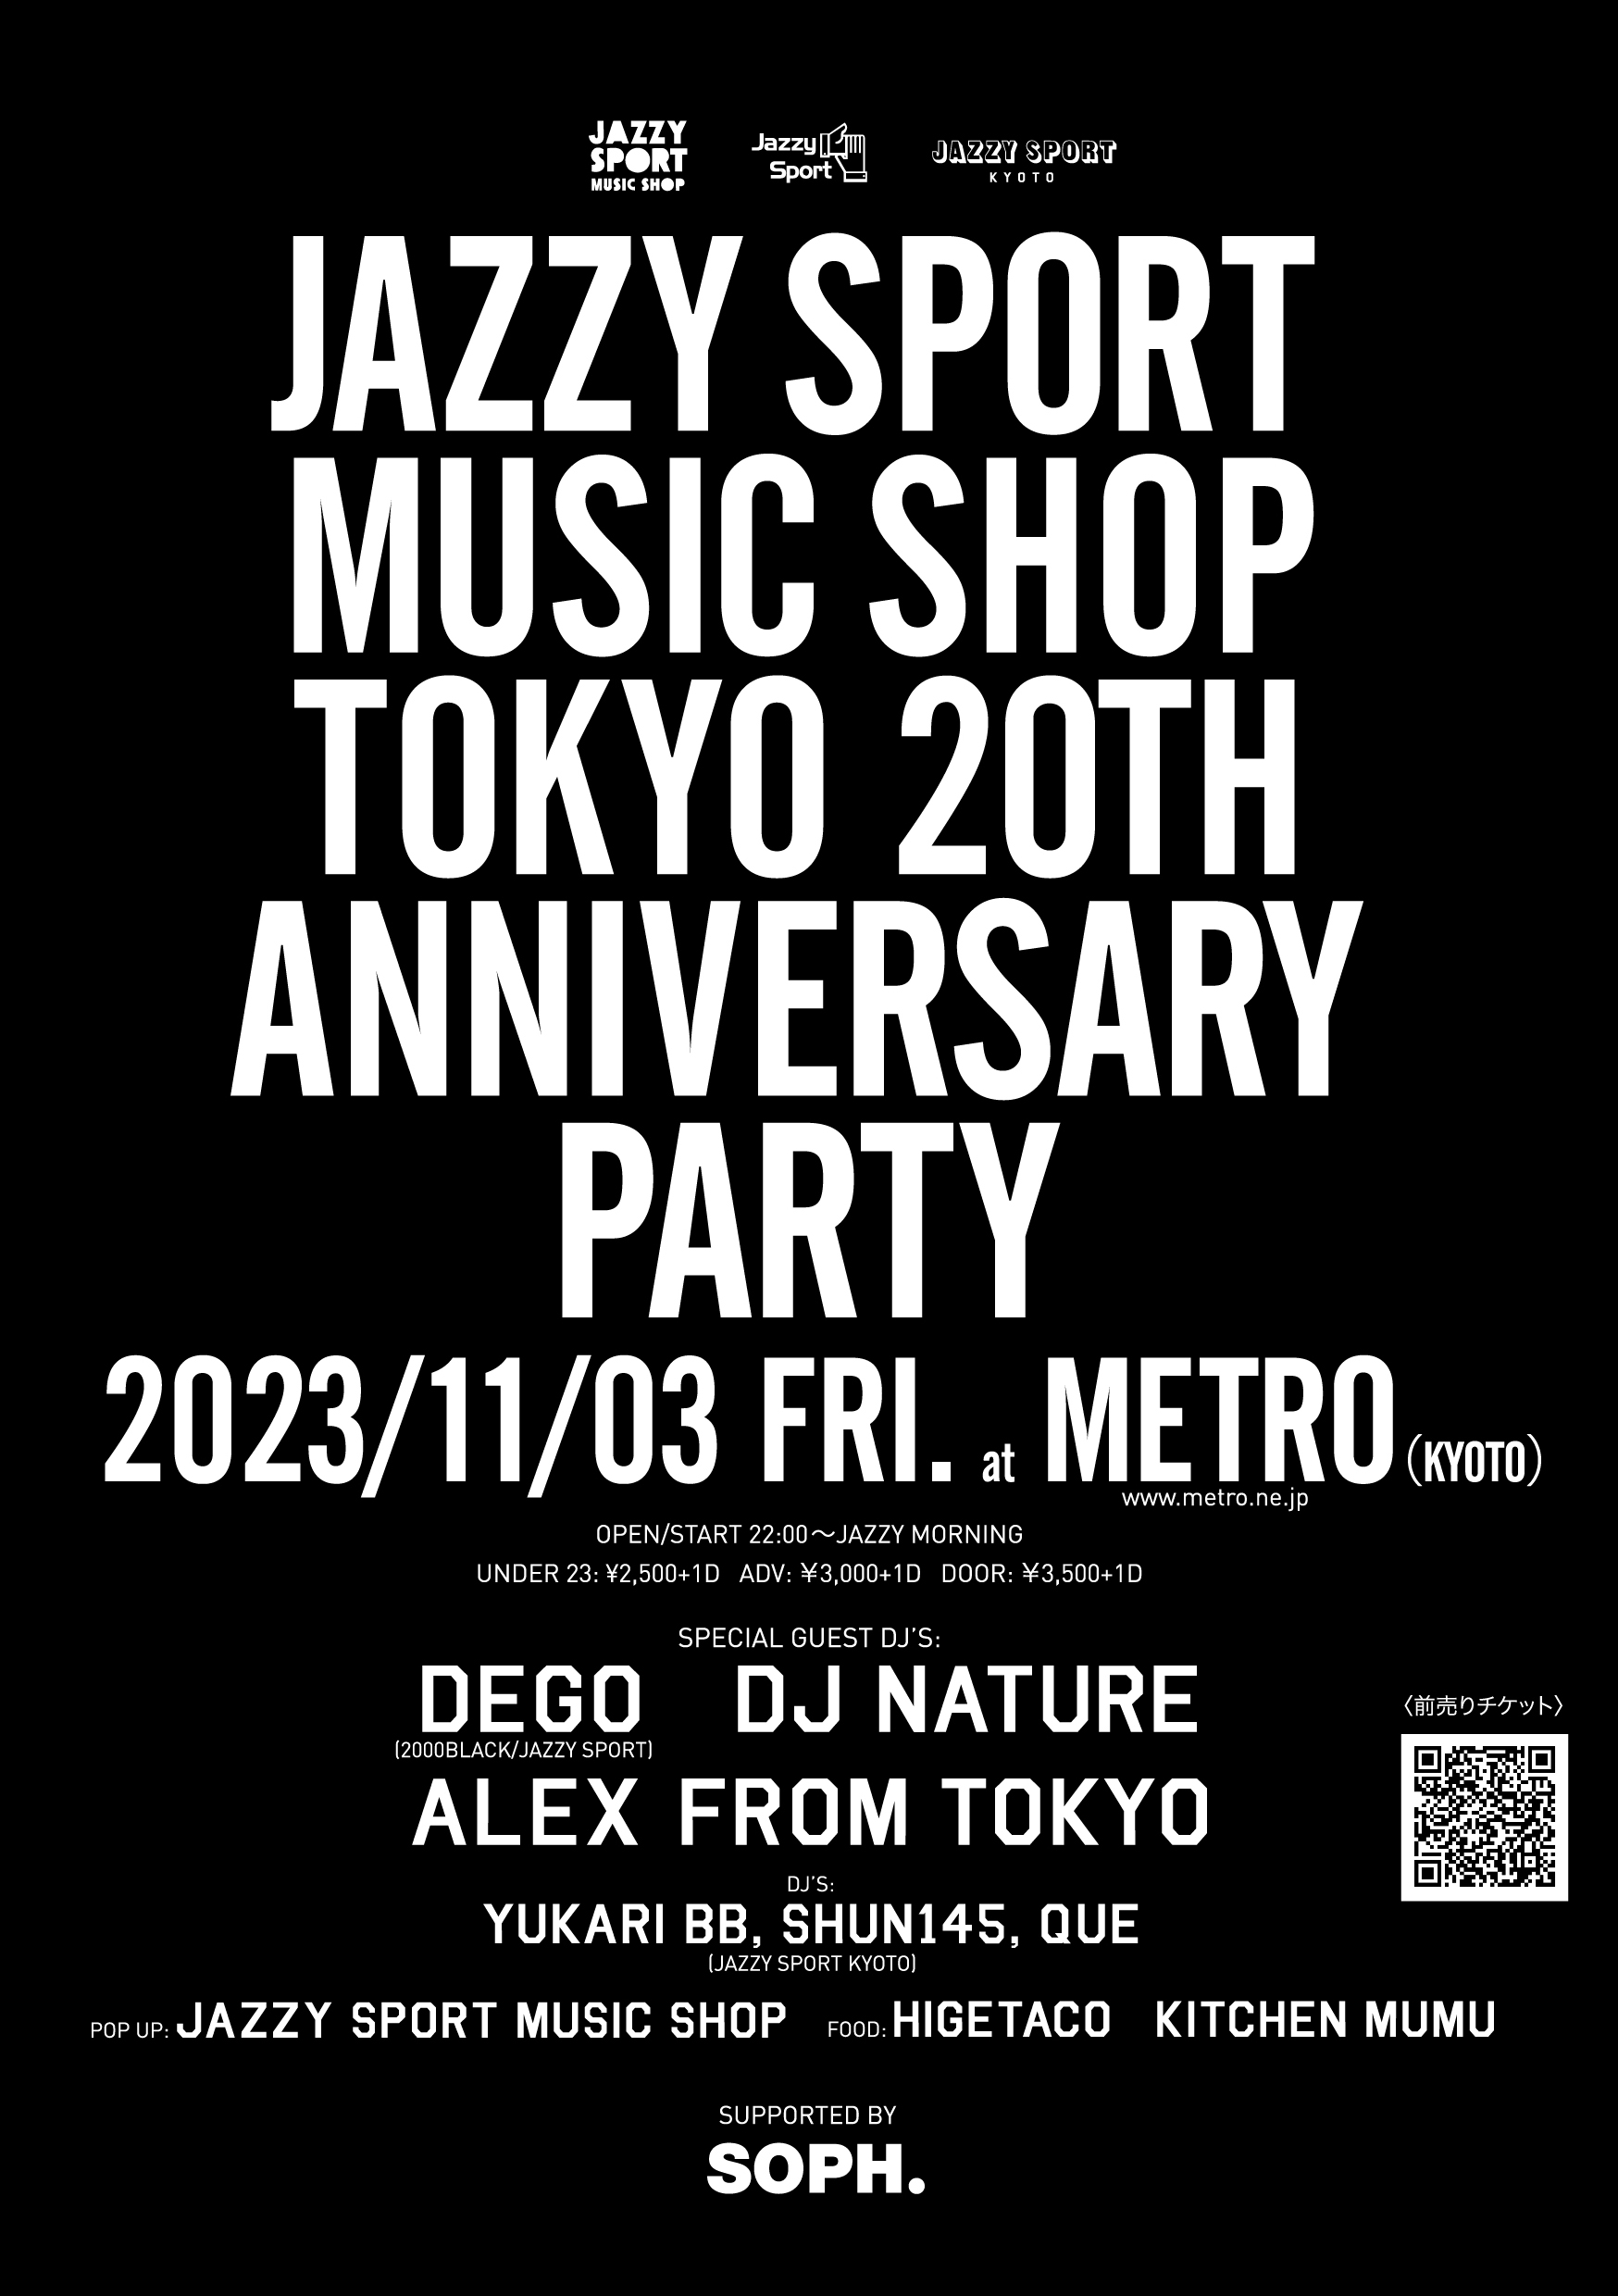 Jazzy Sport Music Shop Tokyo 20th Anniversary – supported by SOPH